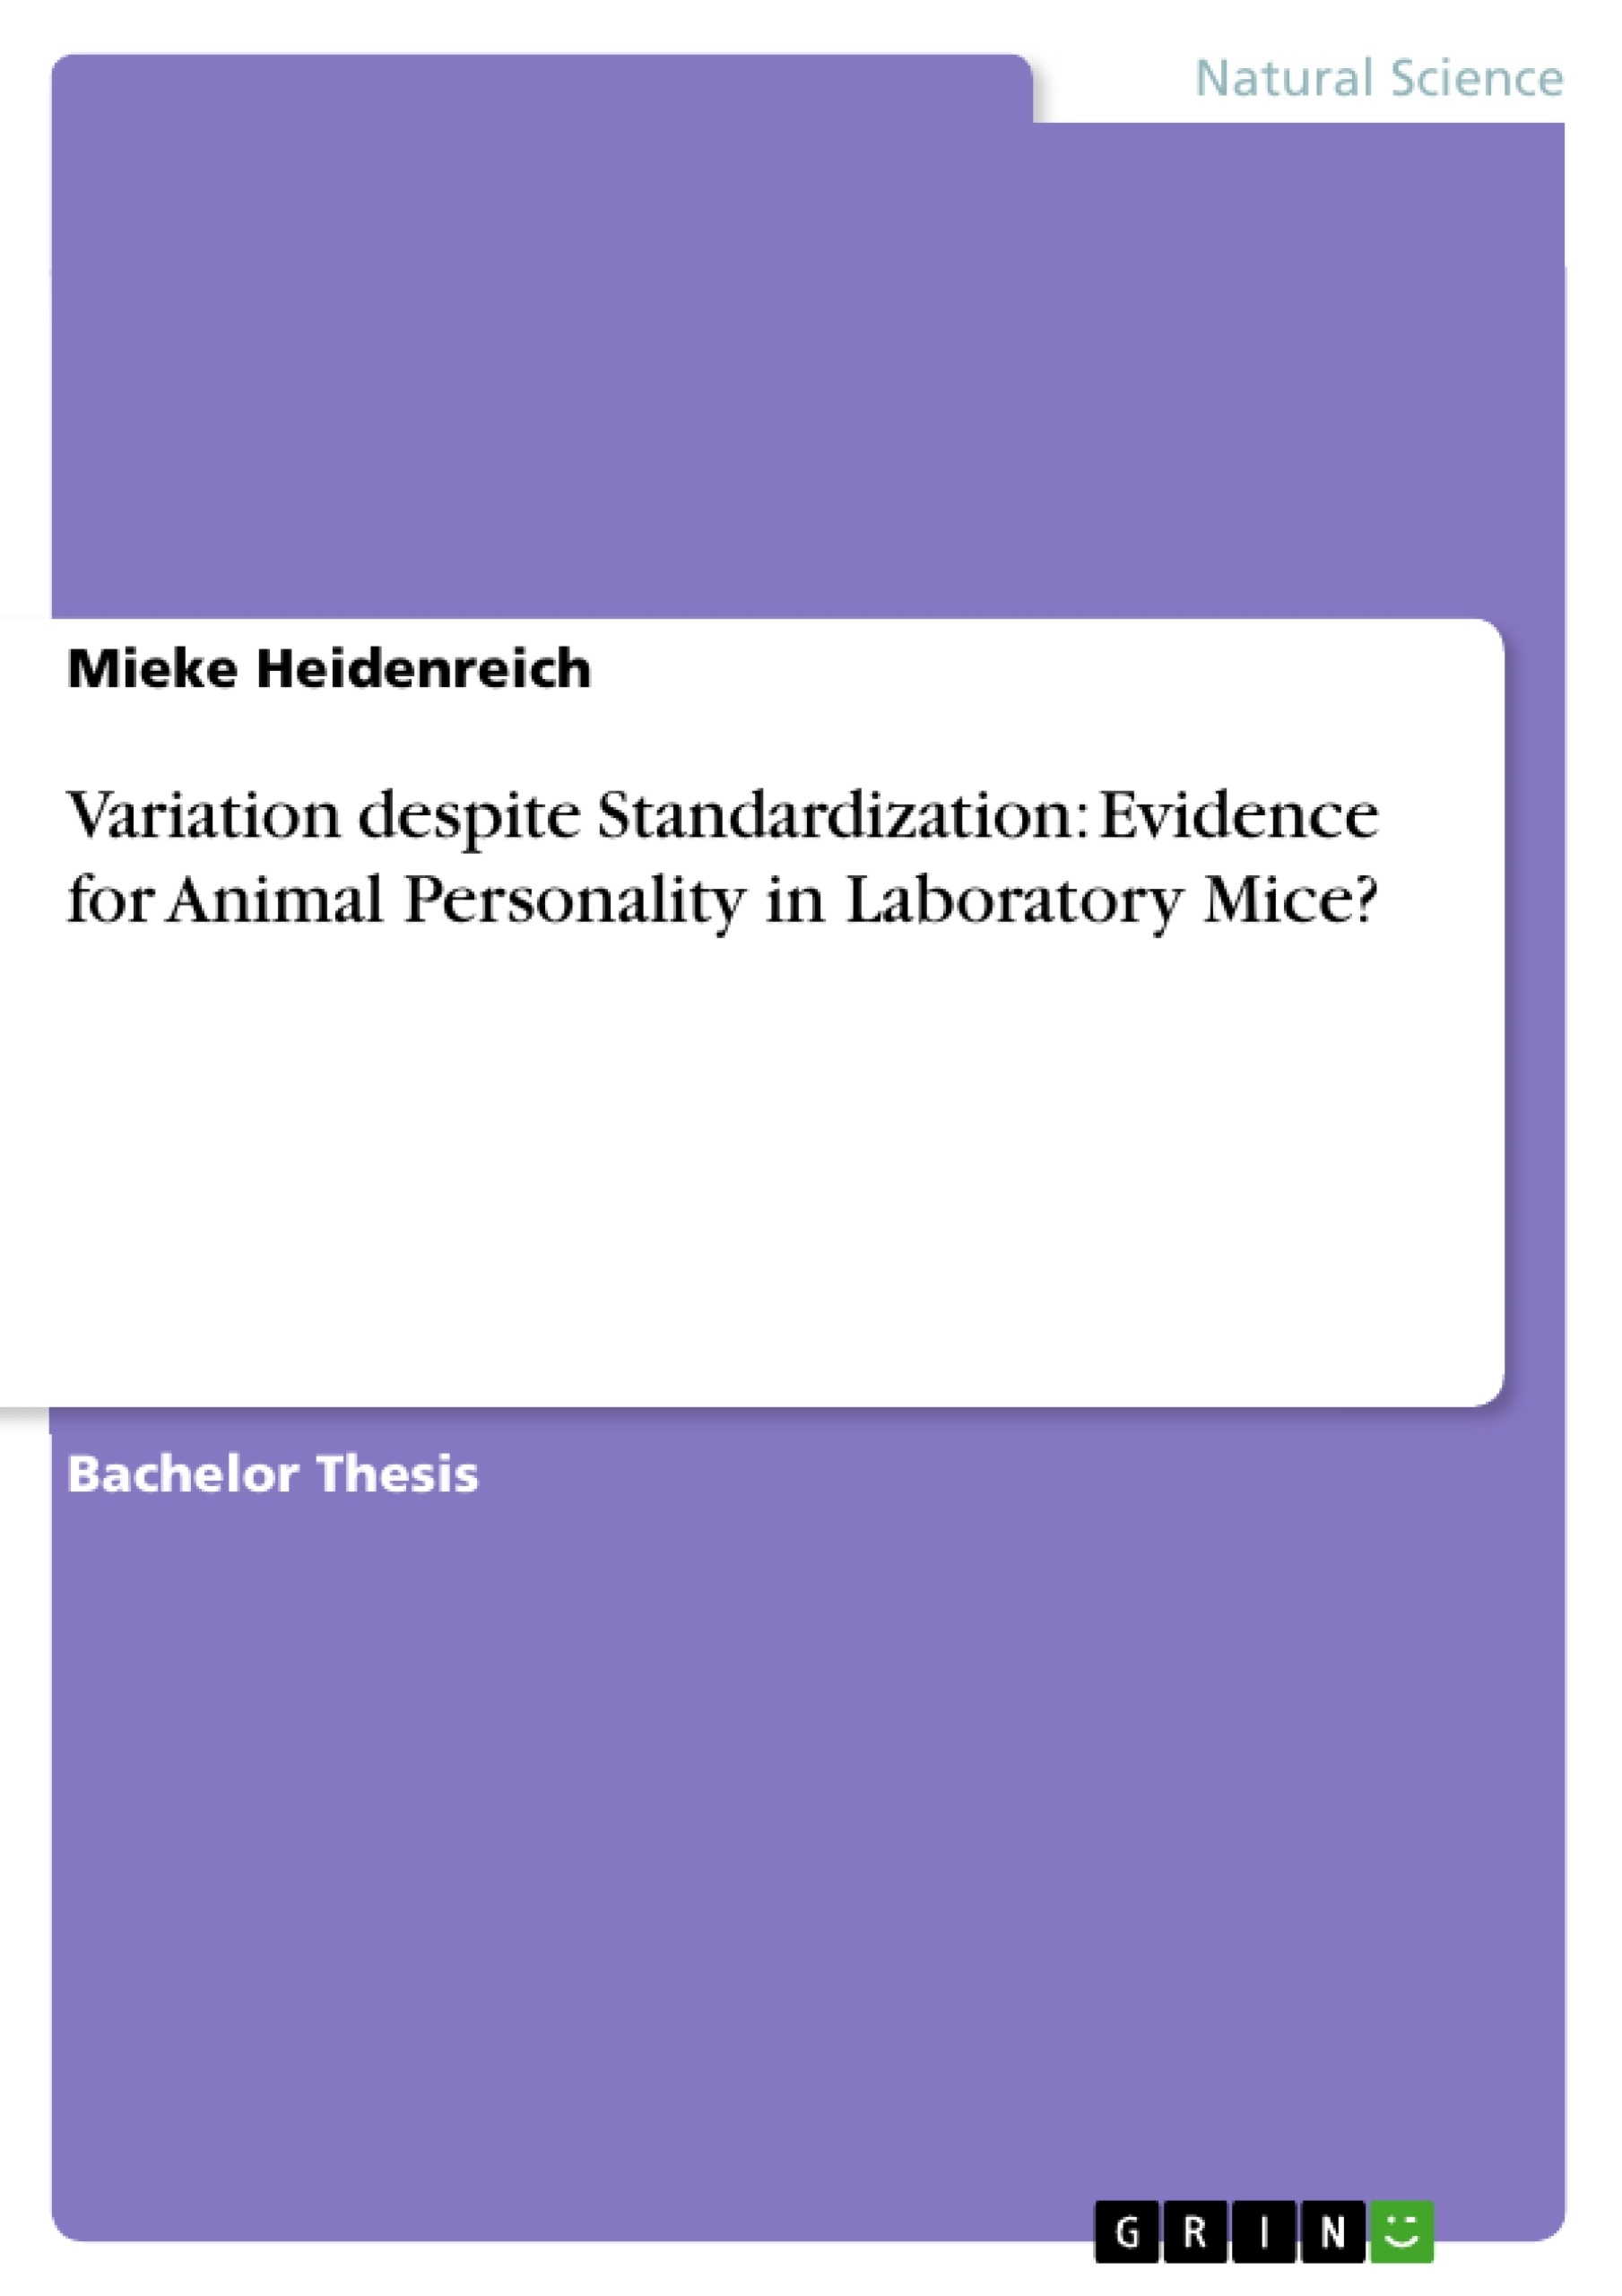 Title: Variation despite Standardization: Evidence for Animal Personality in Laboratory Mice?